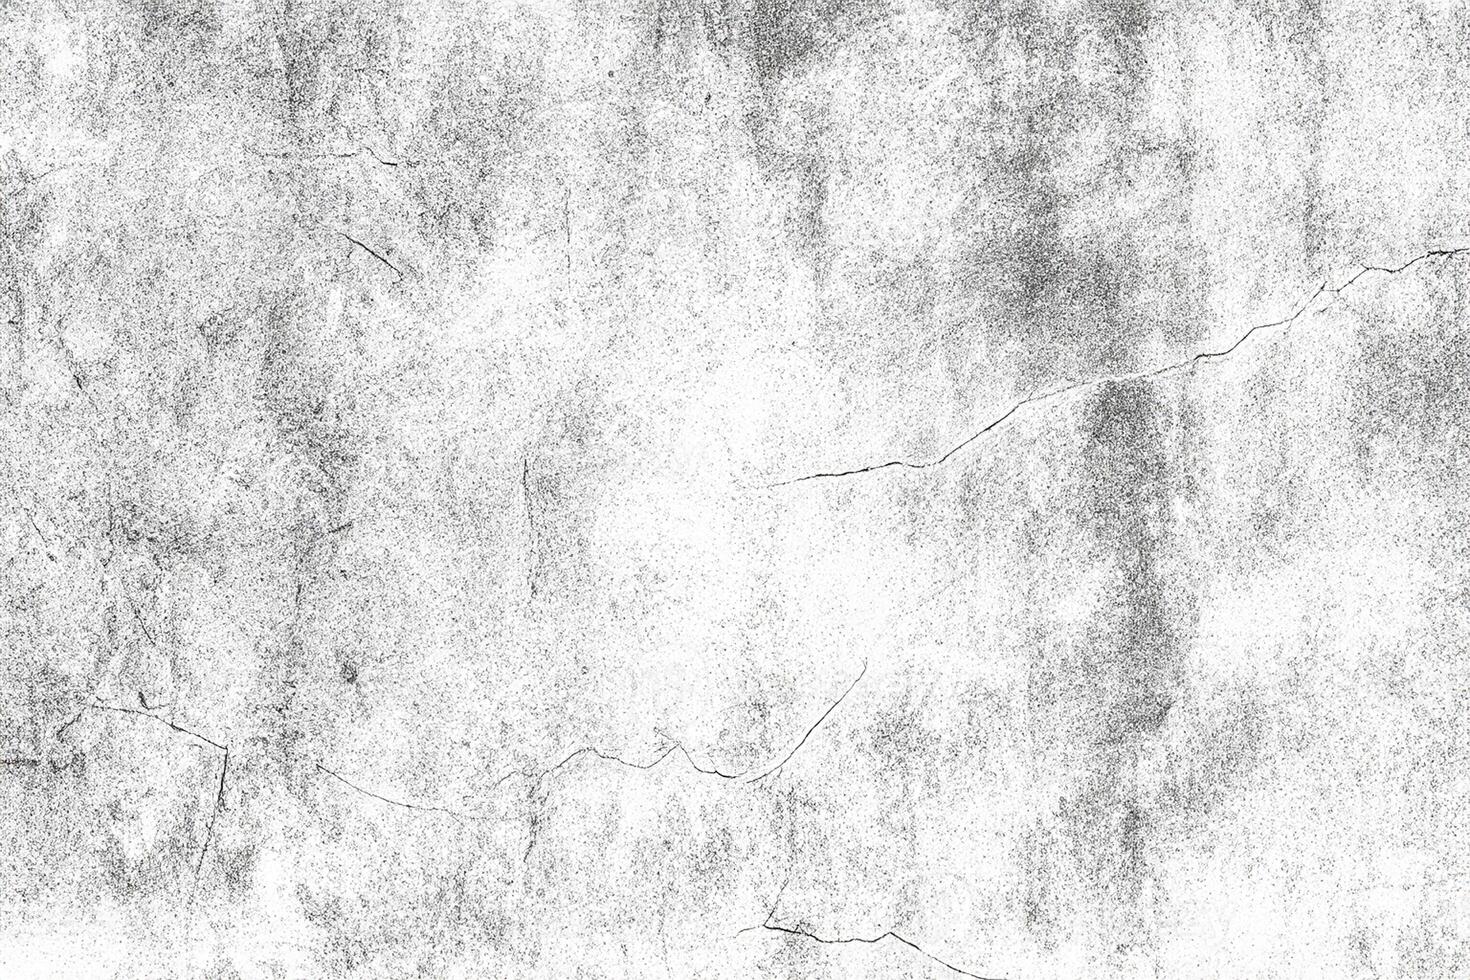 Abstract grunge concrete wall distressed texture background photo